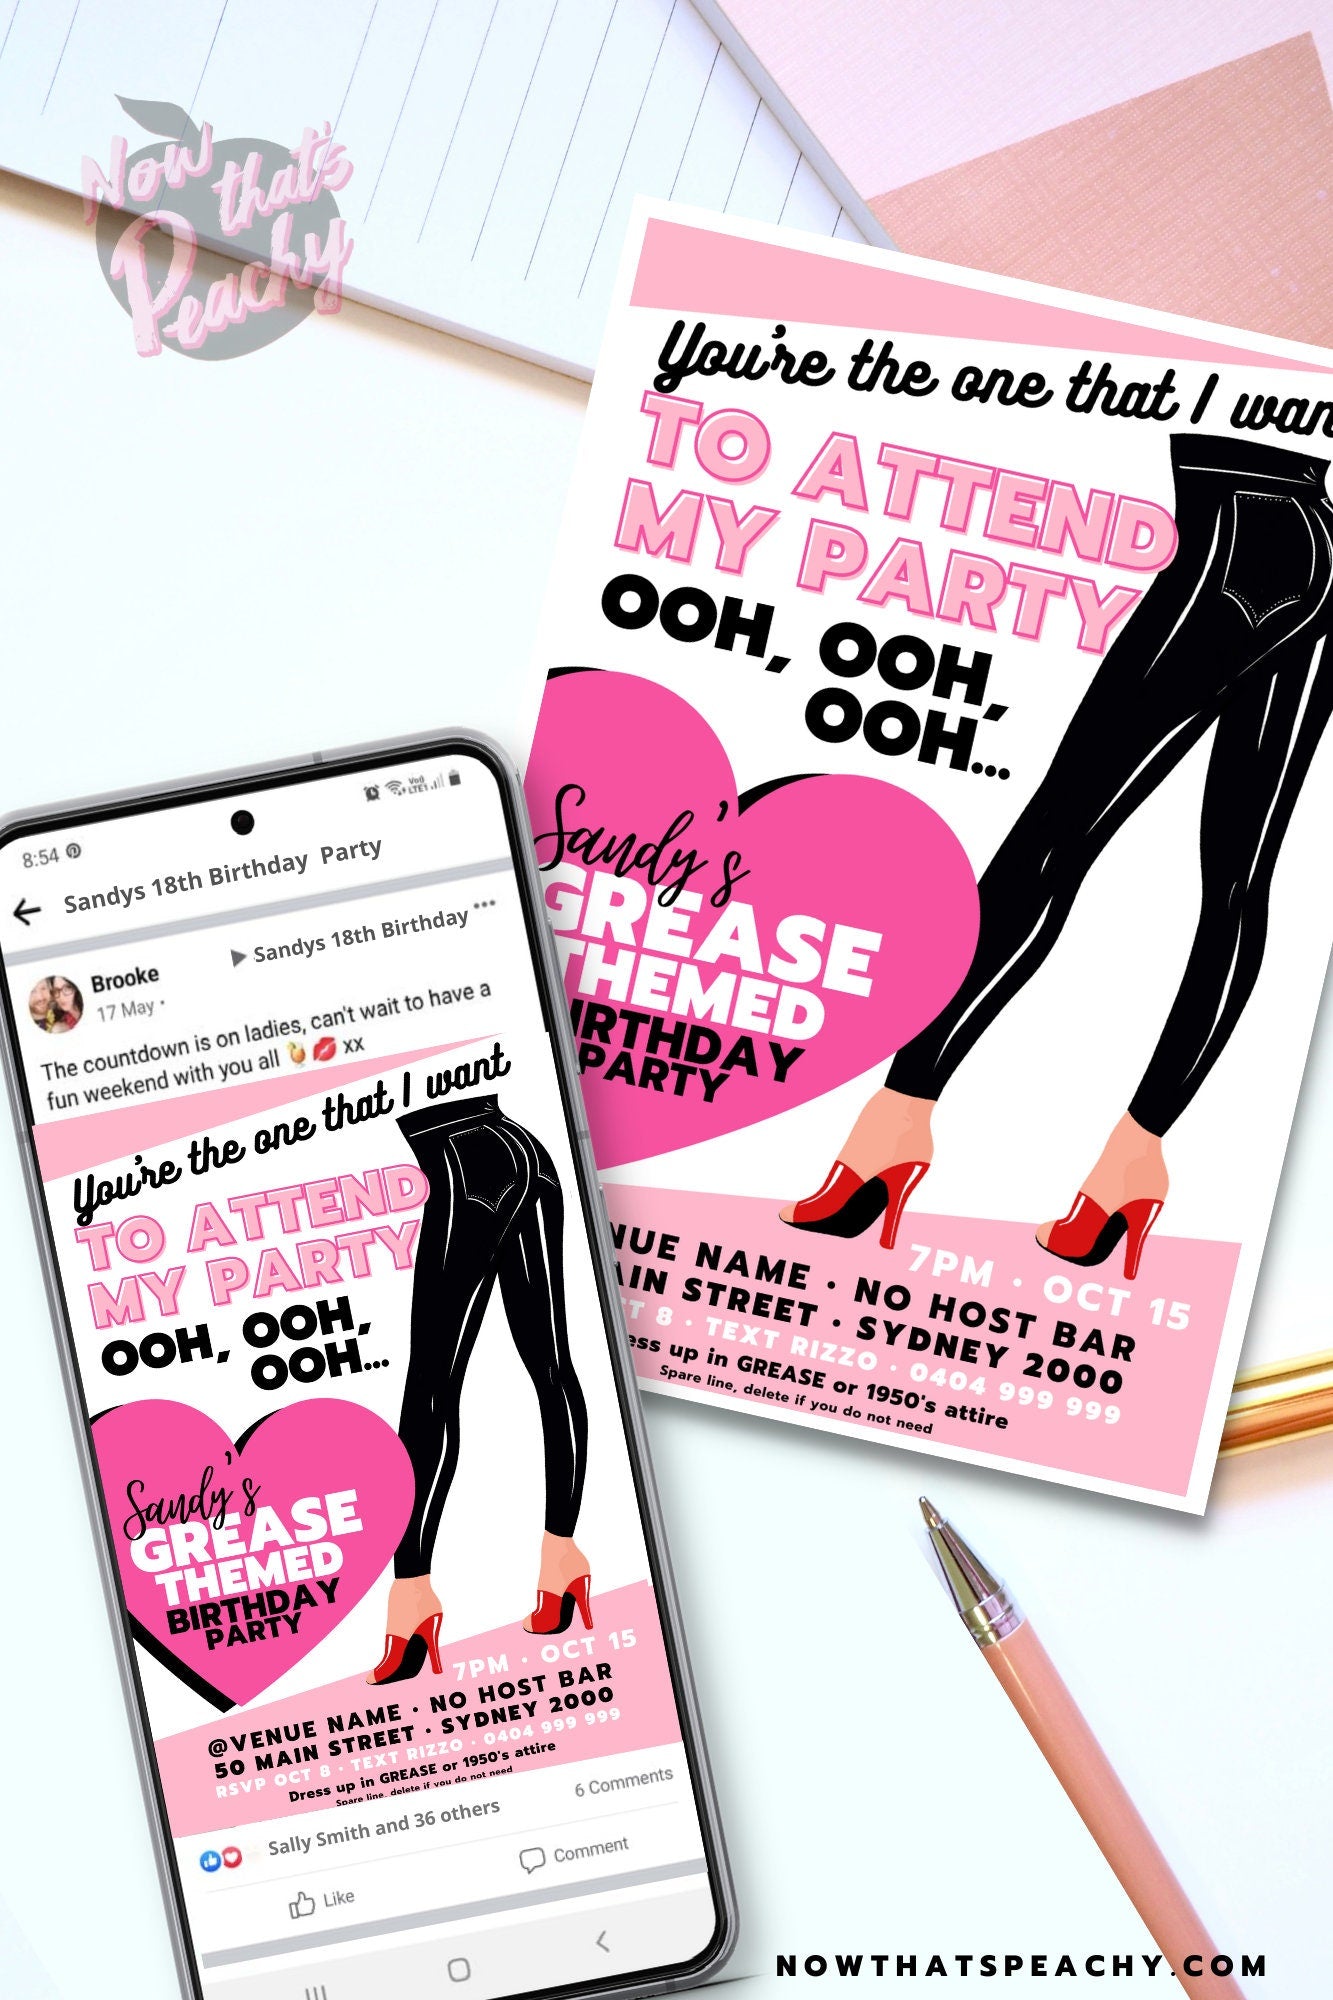 Grease Movie Editable party invite easy to edit in canva custom 1950s fifties 50's printable template digital instant download edit Danny Sandy T-birds Pink Ladies  invite soda hop jukebox rockabilly rock'n'roll musical movie design pink black white modern color fun themed birthday event 